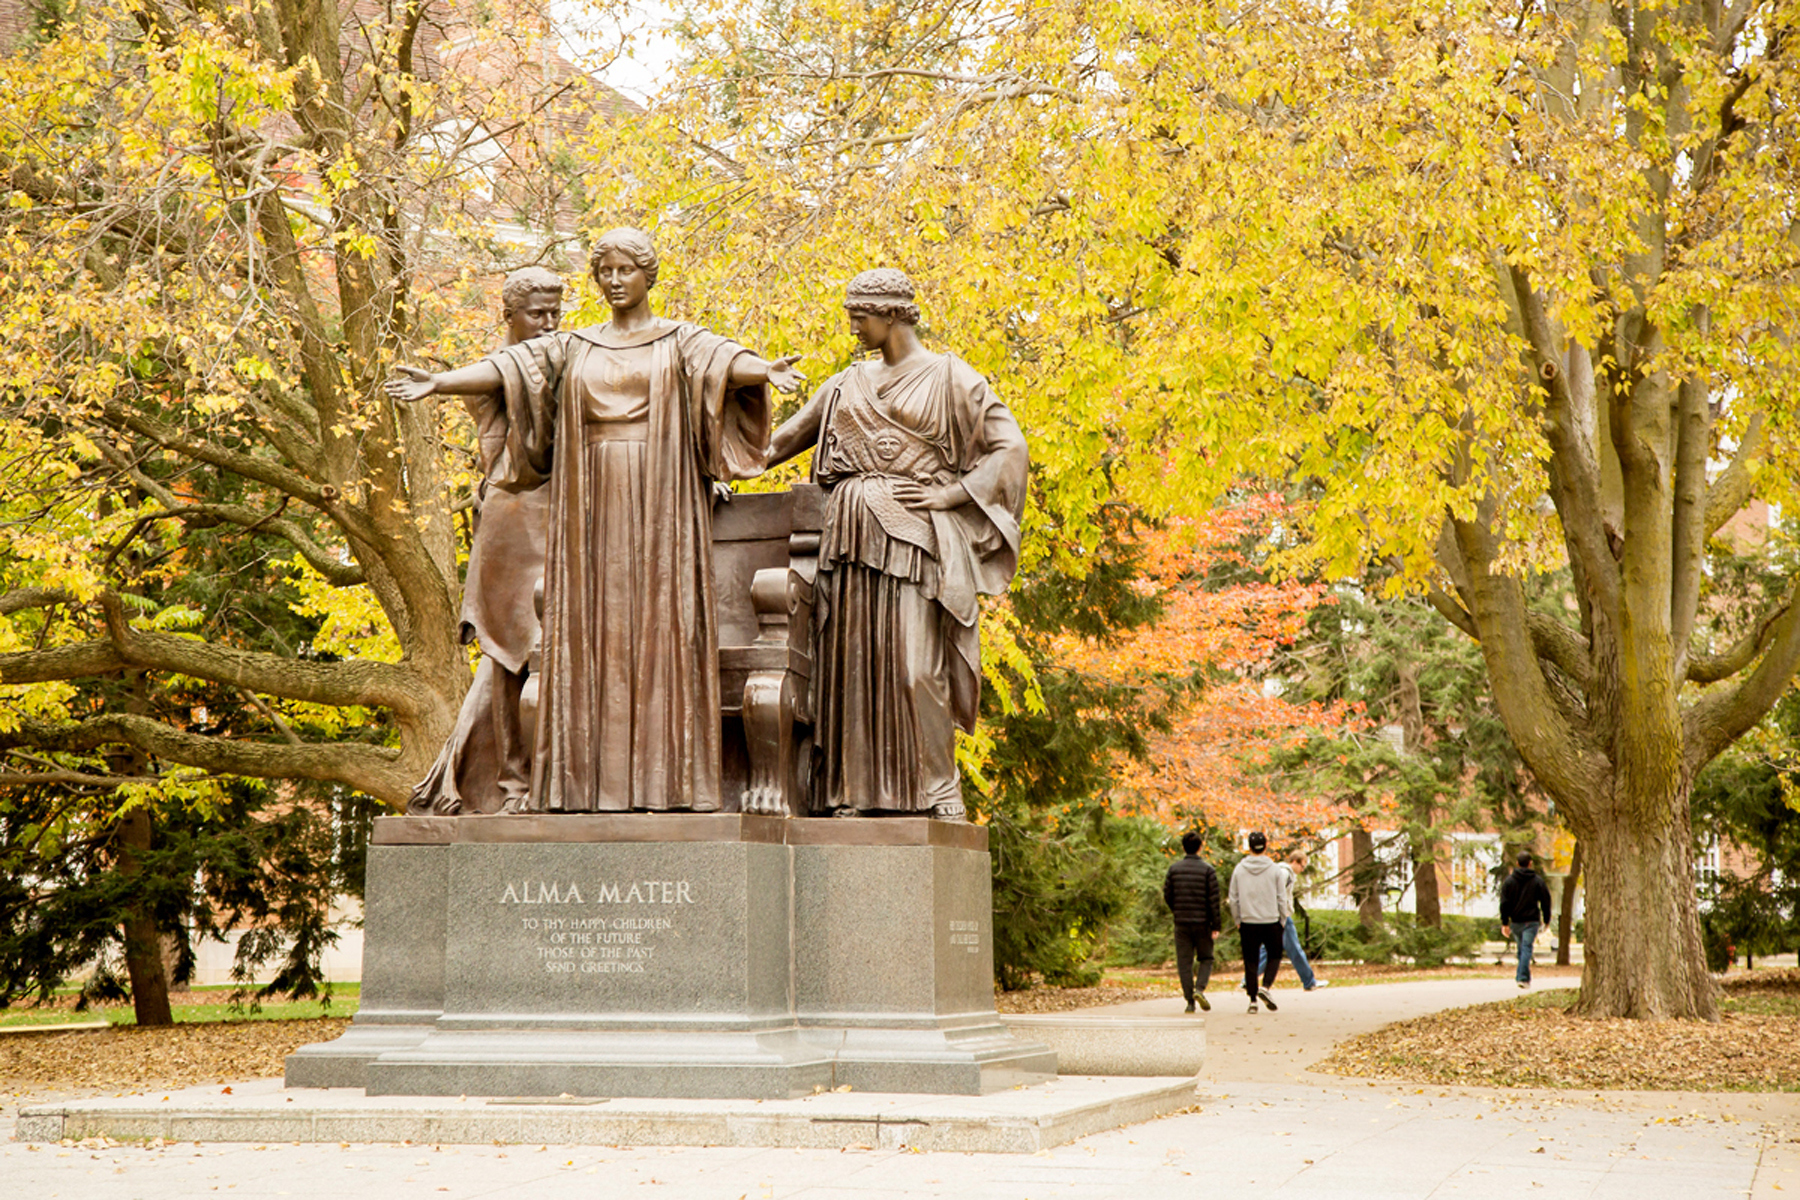 Bronze Alma Mater statue surrounded by trees